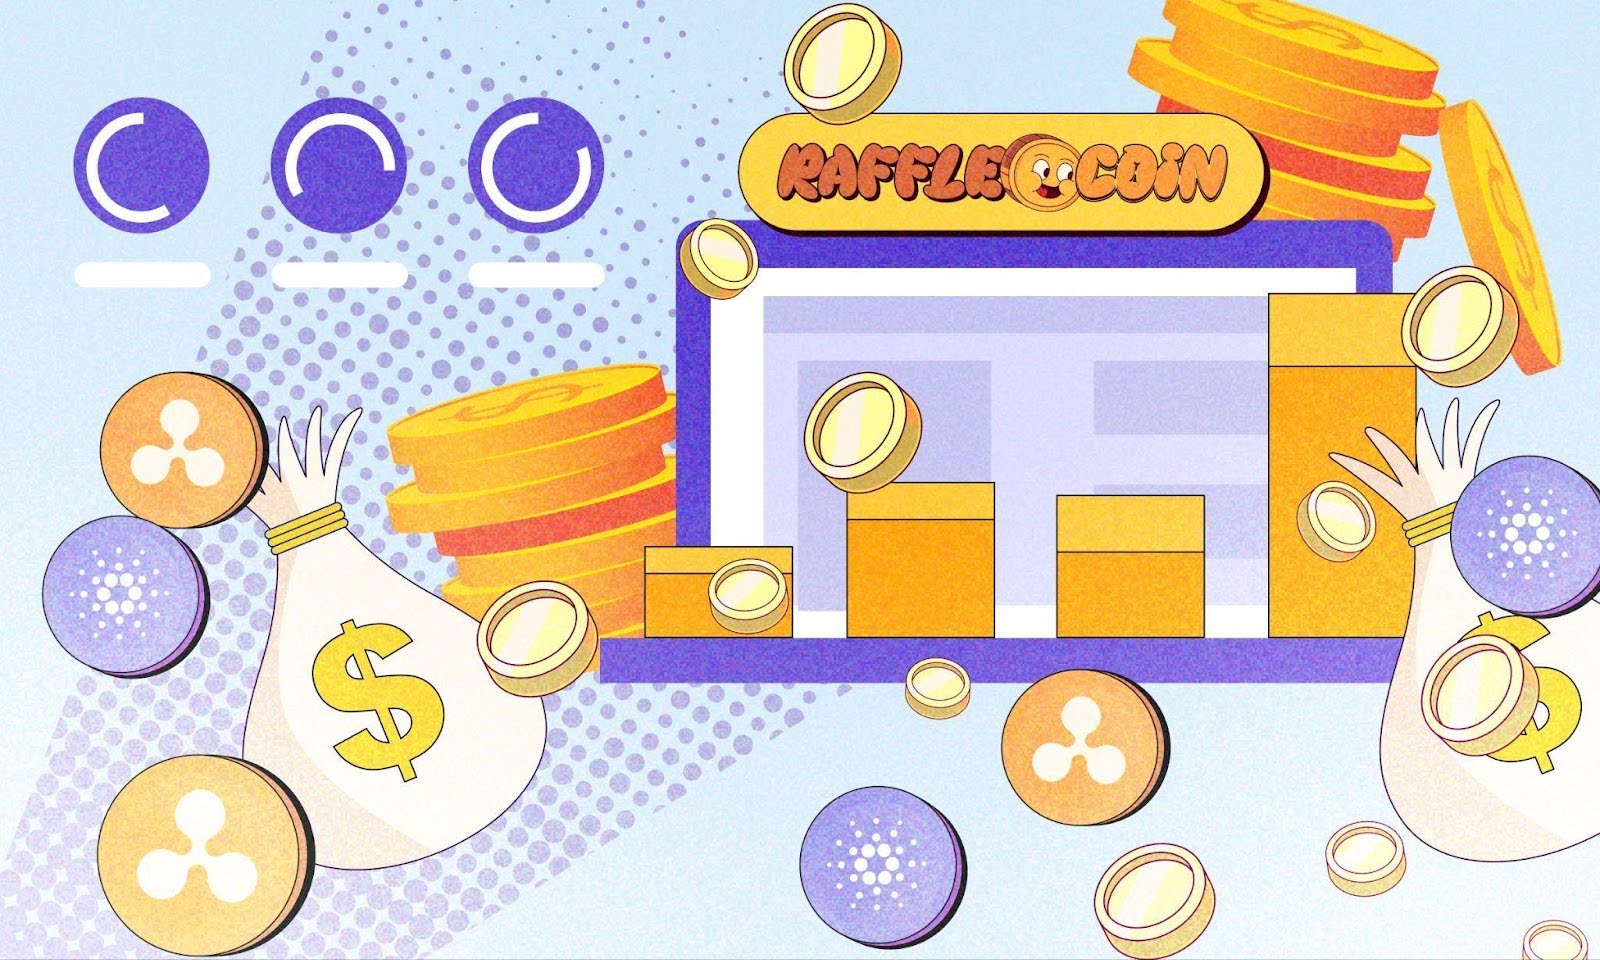 Raffle Coin’s Innovation Excites Cardano & XRP Investors as Ethereum Struggles